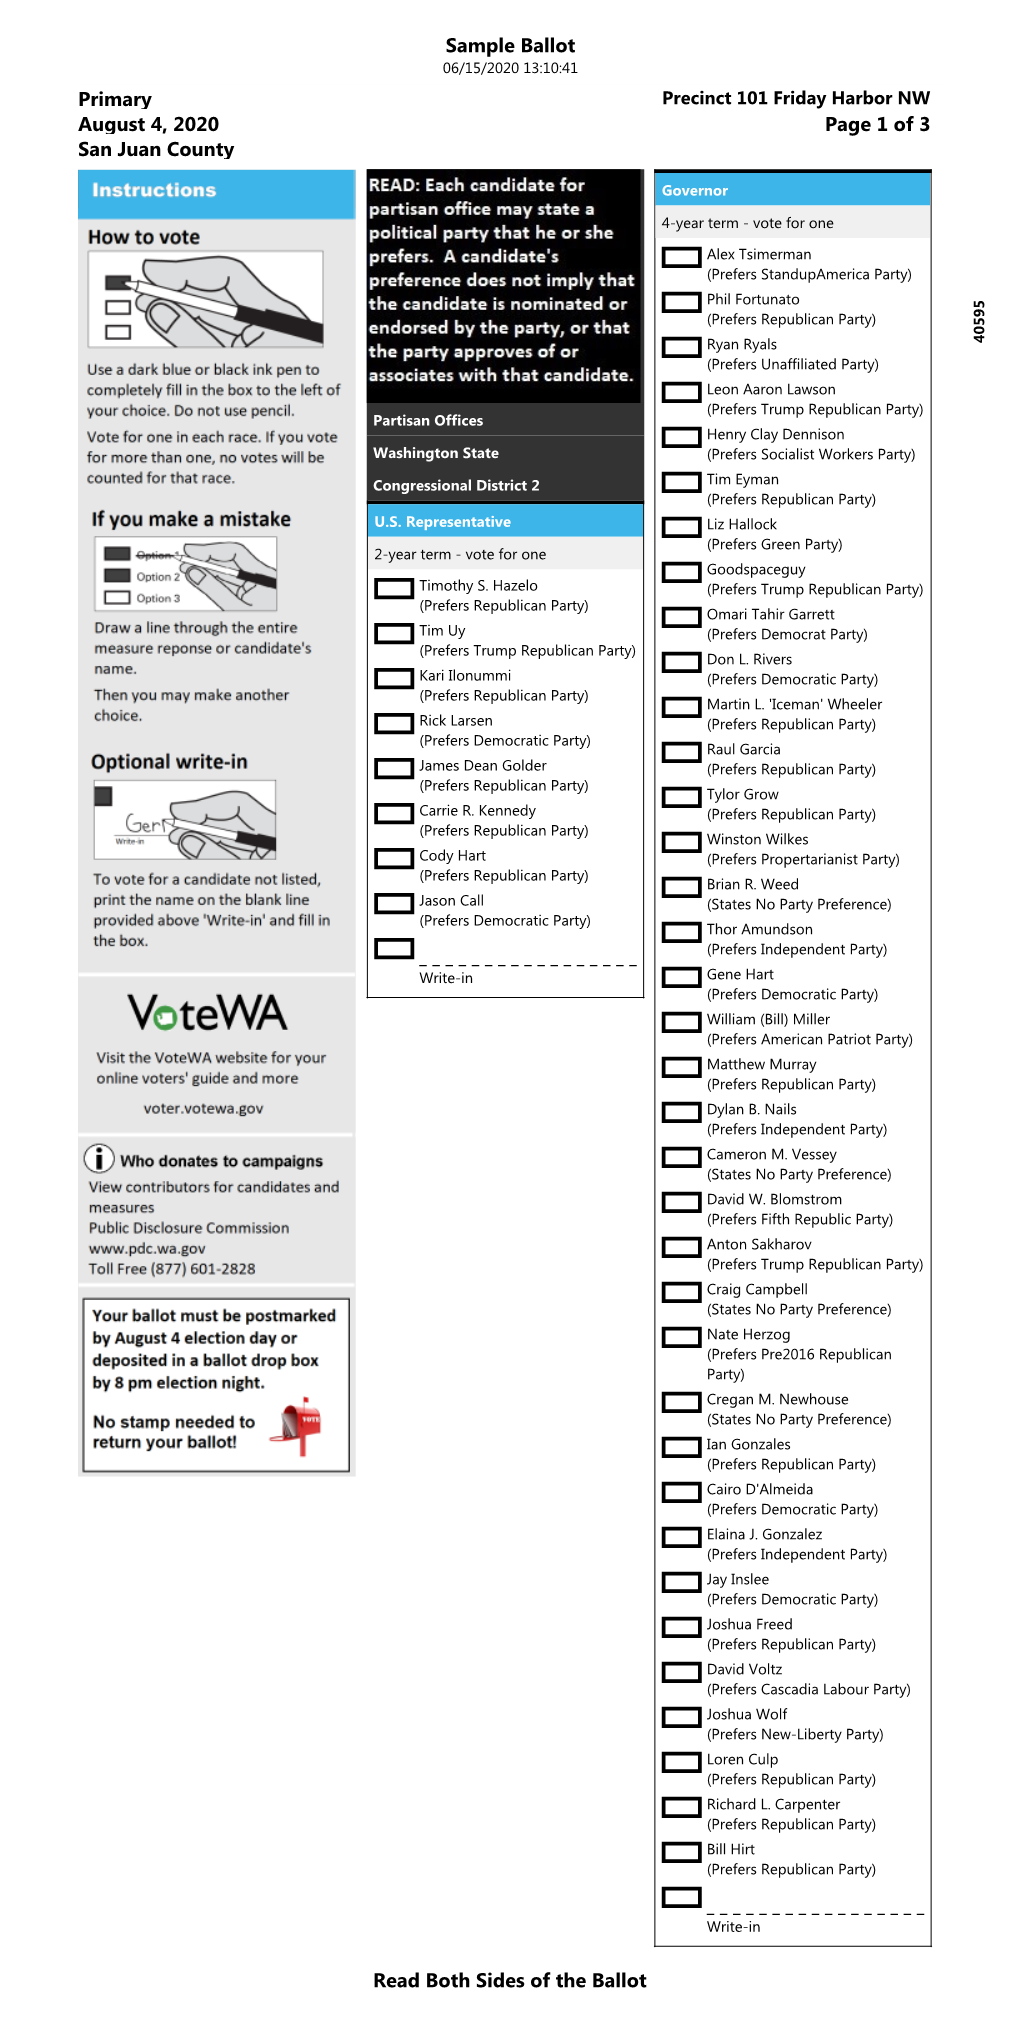 Sample Ballot Read Both Sides of the Ballot August 4, 2020 Primary San Juan County Page 1 of 3